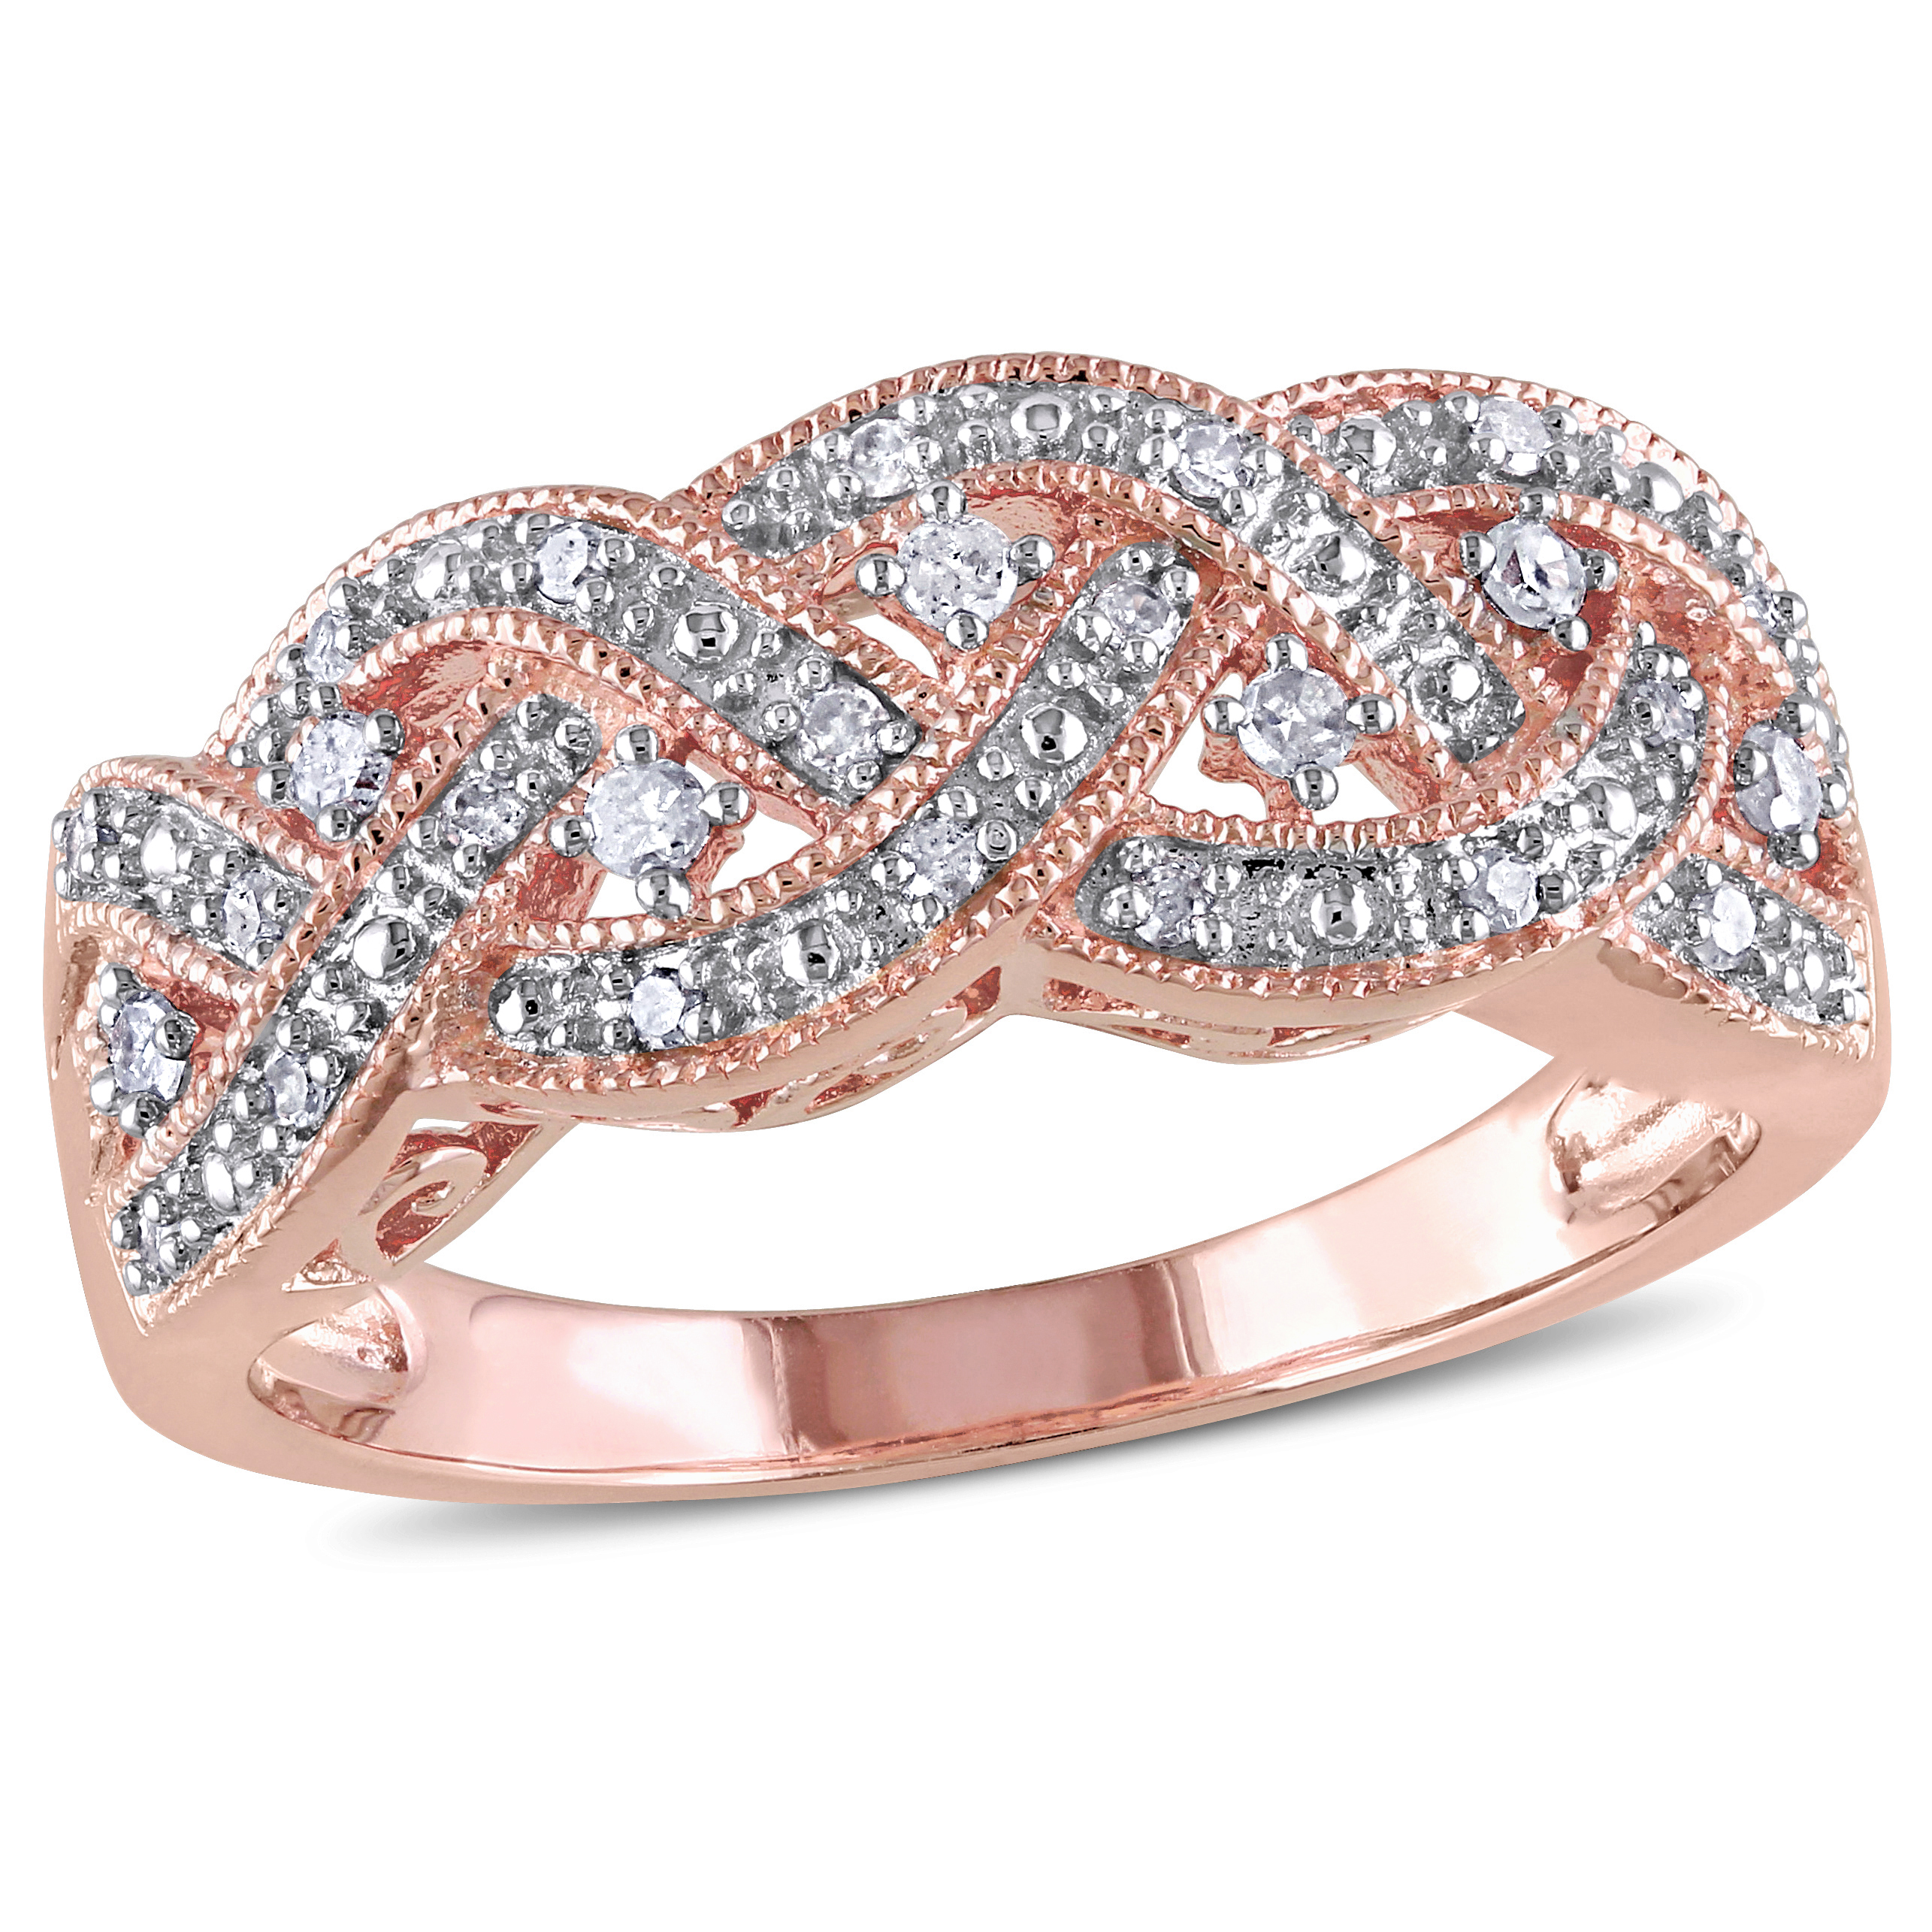 1/8 CT TW Diamond Braided Ring in Pink Plated Sterling Silver